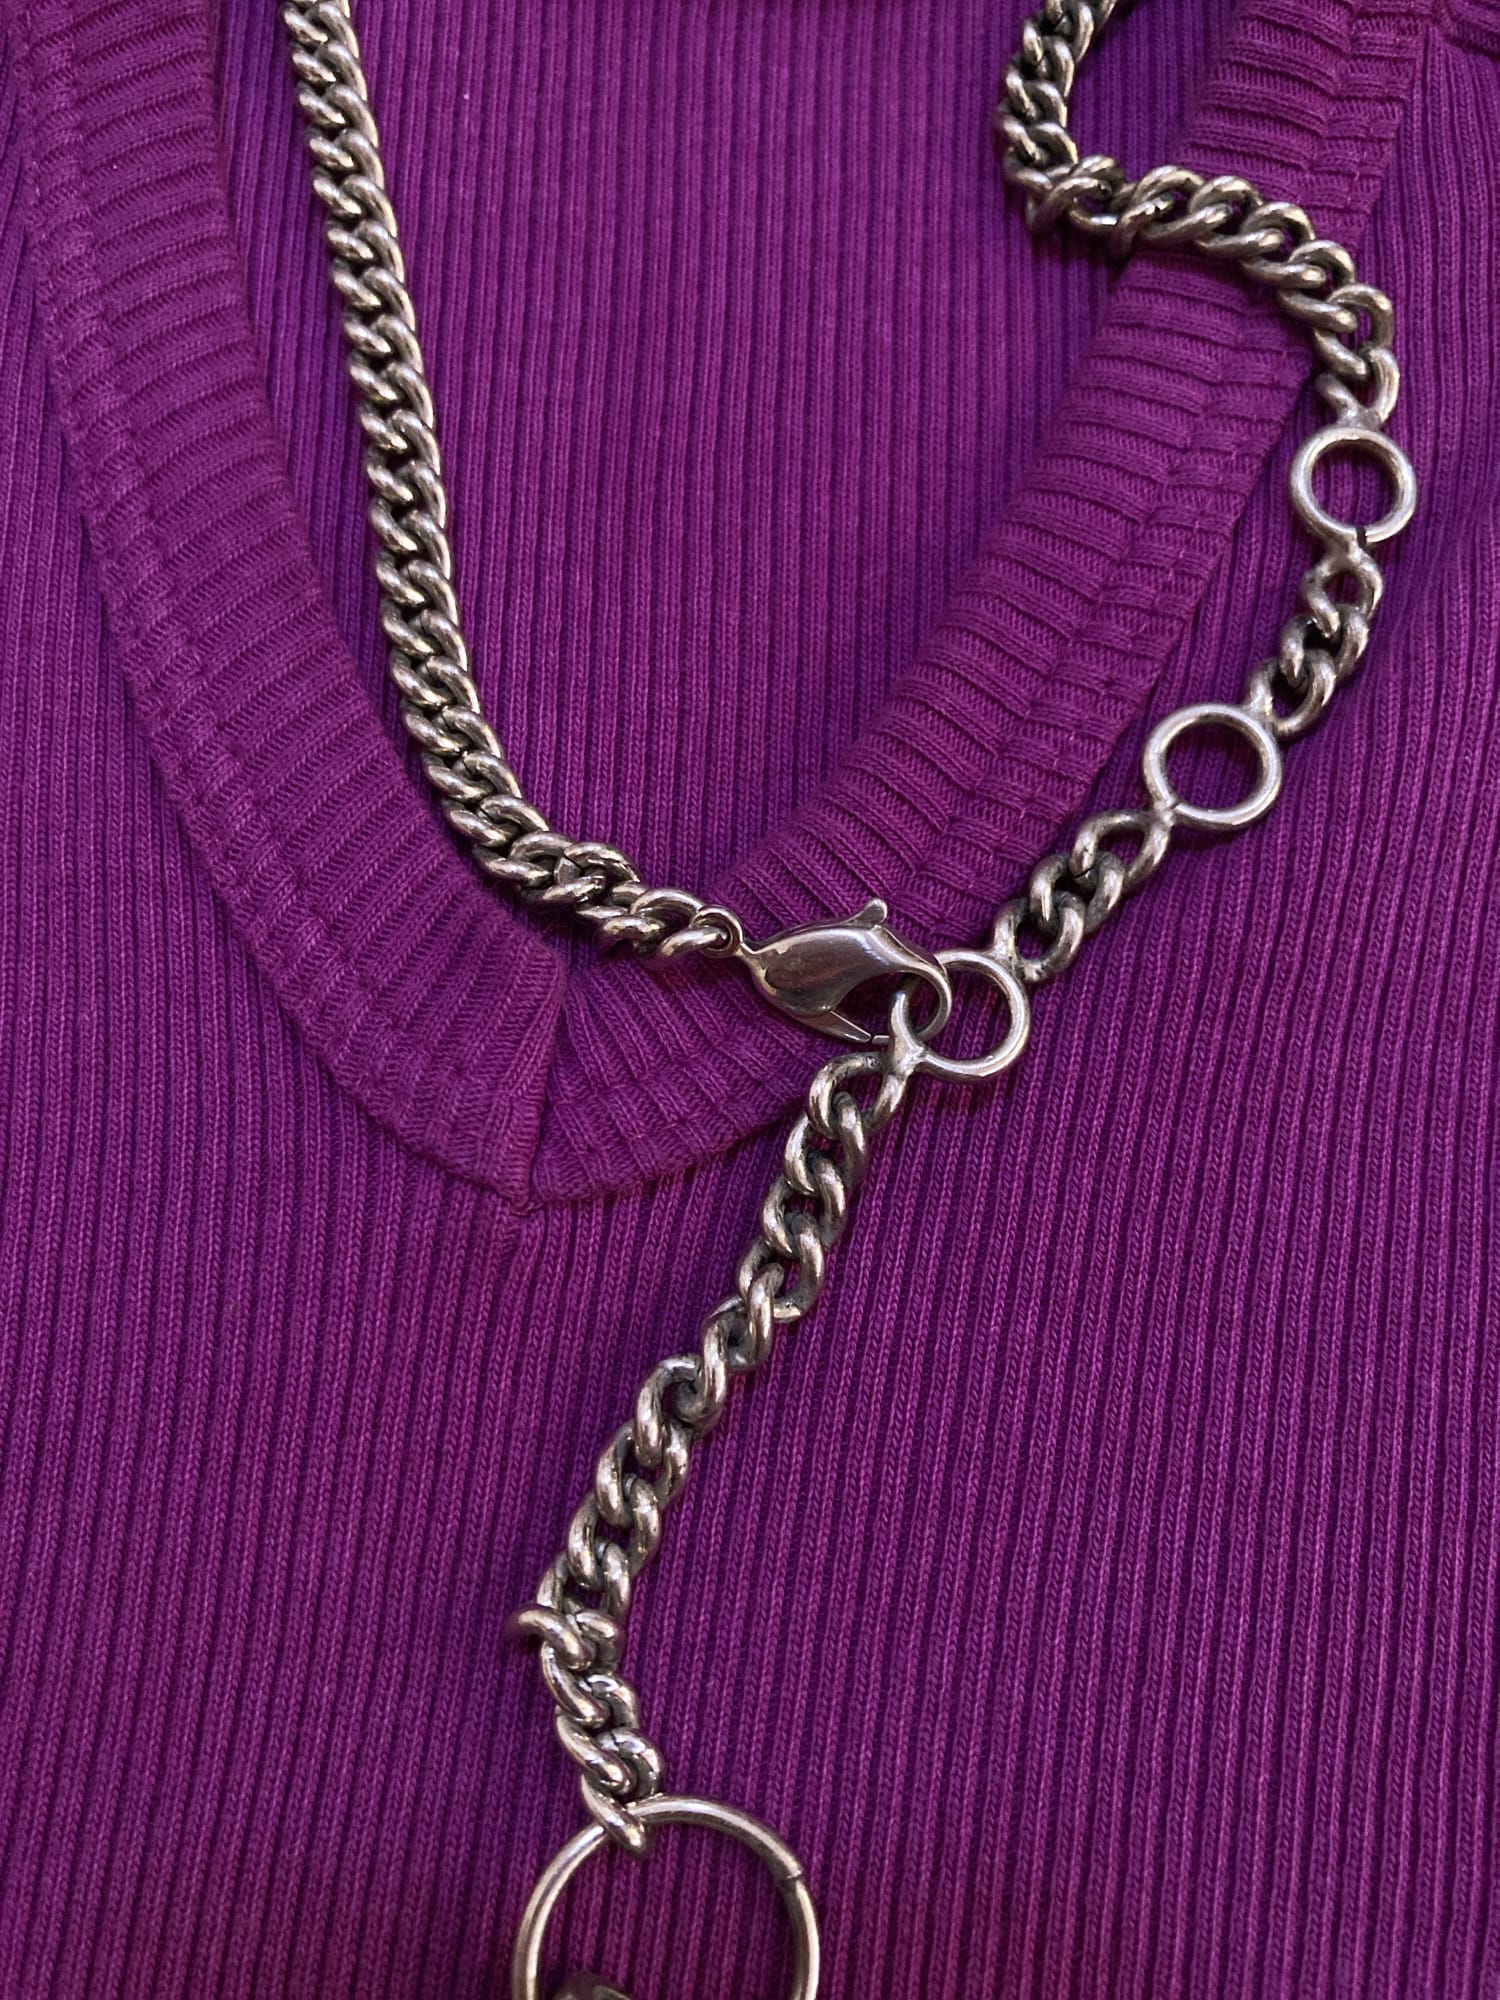 Dirk Bikkembergs winter 1996 purple rib knit sleeveless top with metal chain necklace